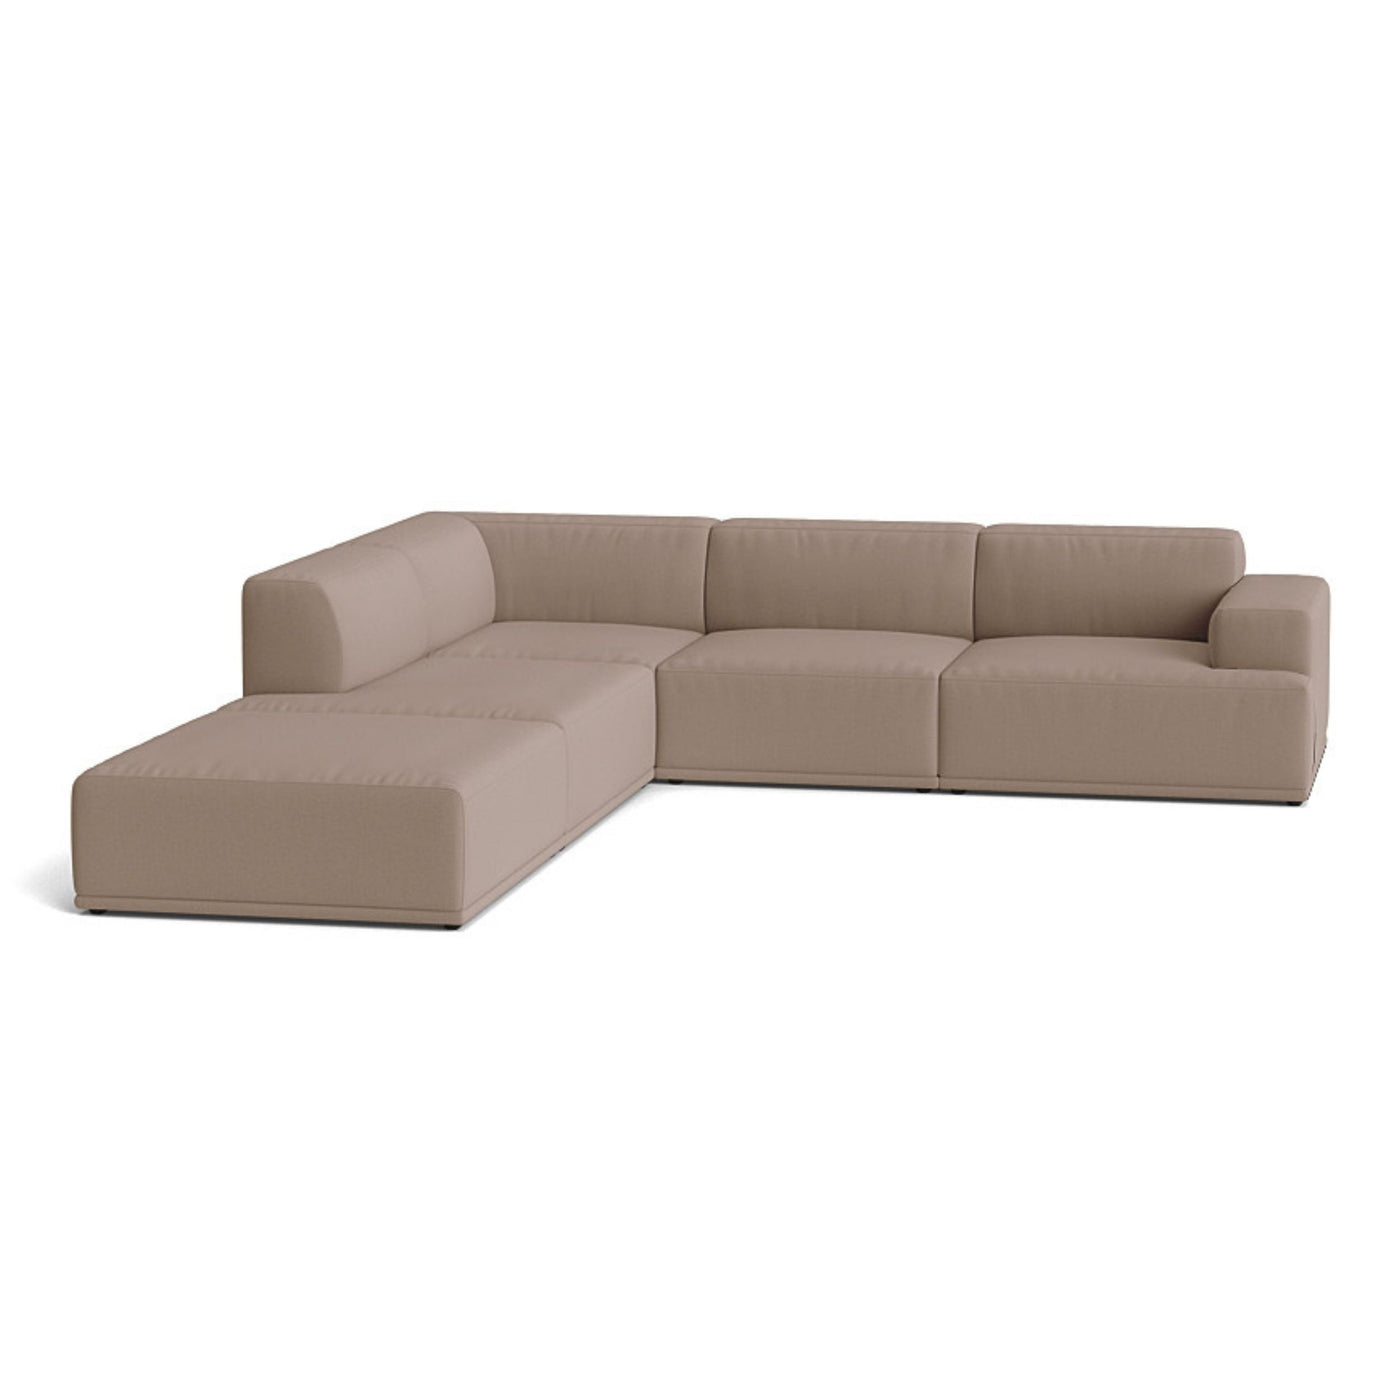 Muuto Connect Soft Modular Corner Sofa, configuration 1. Made-to-order from someday designs. #colour_steelcut-trio-426